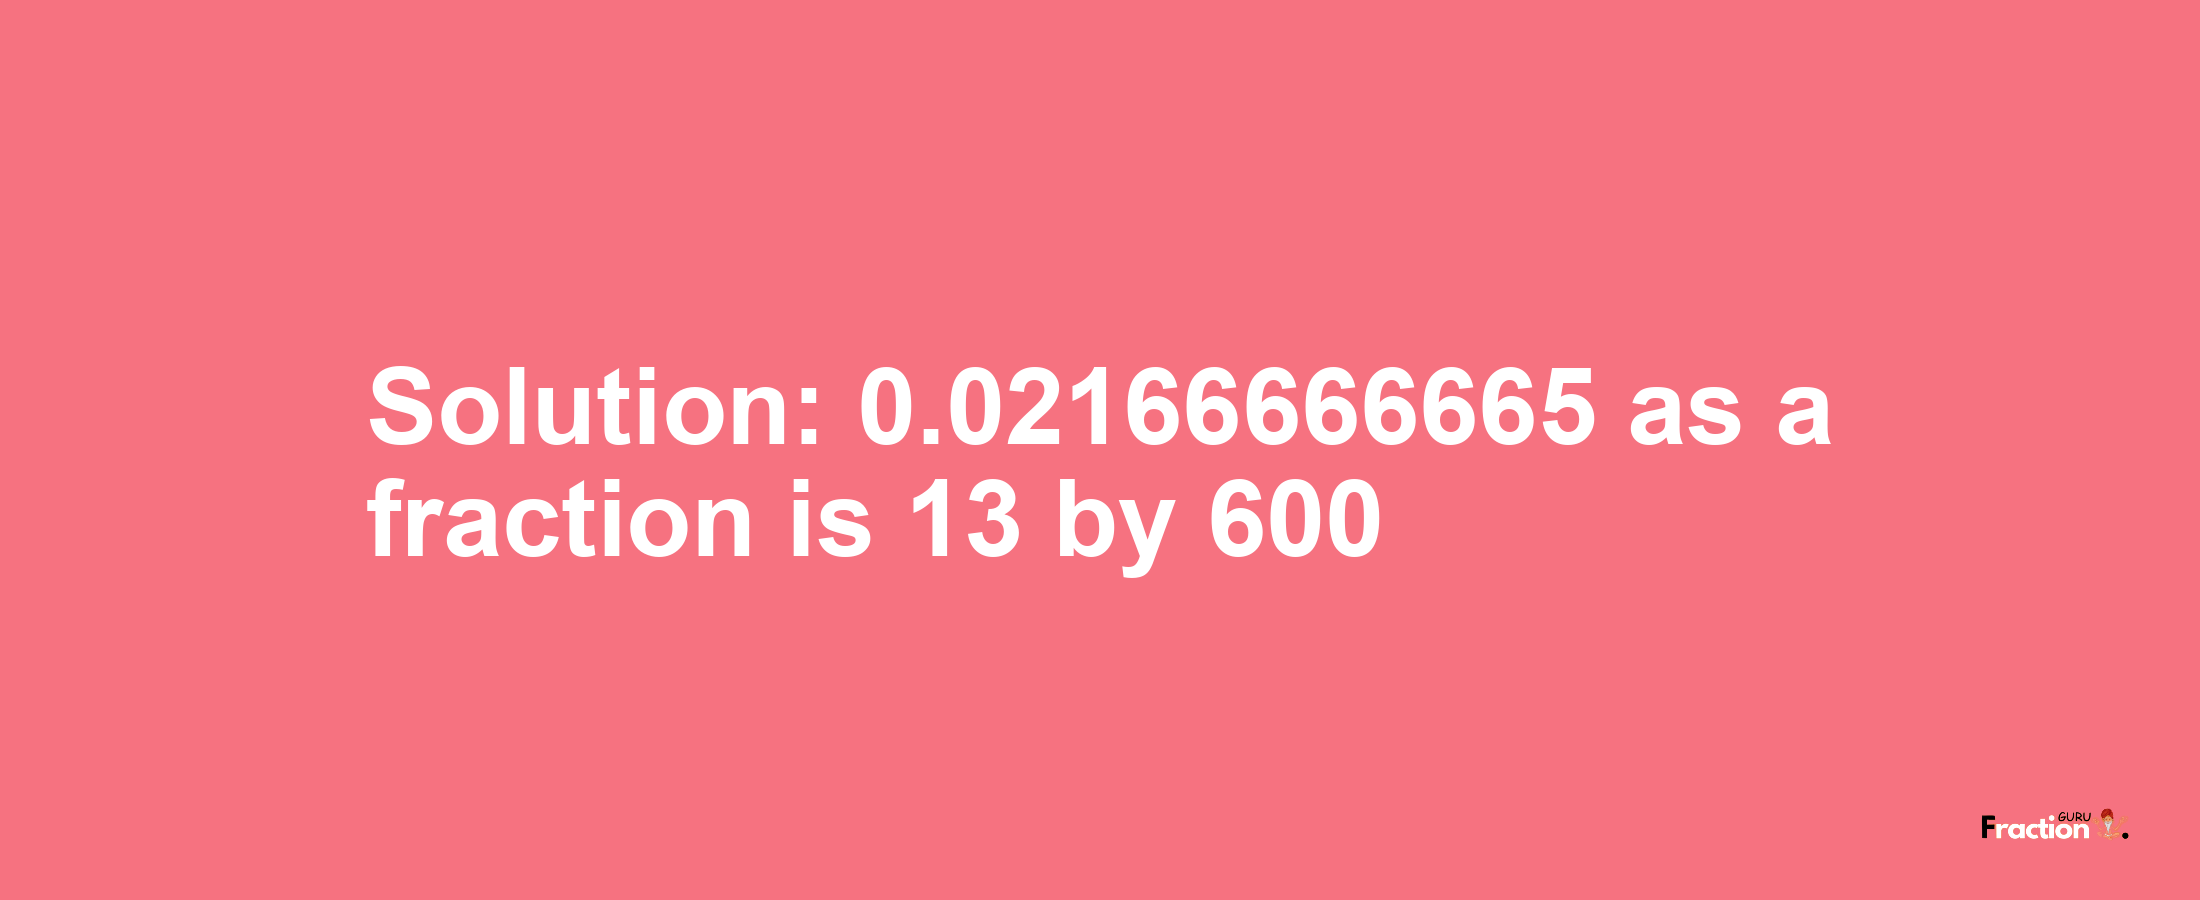 Solution:0.02166666665 as a fraction is 13/600